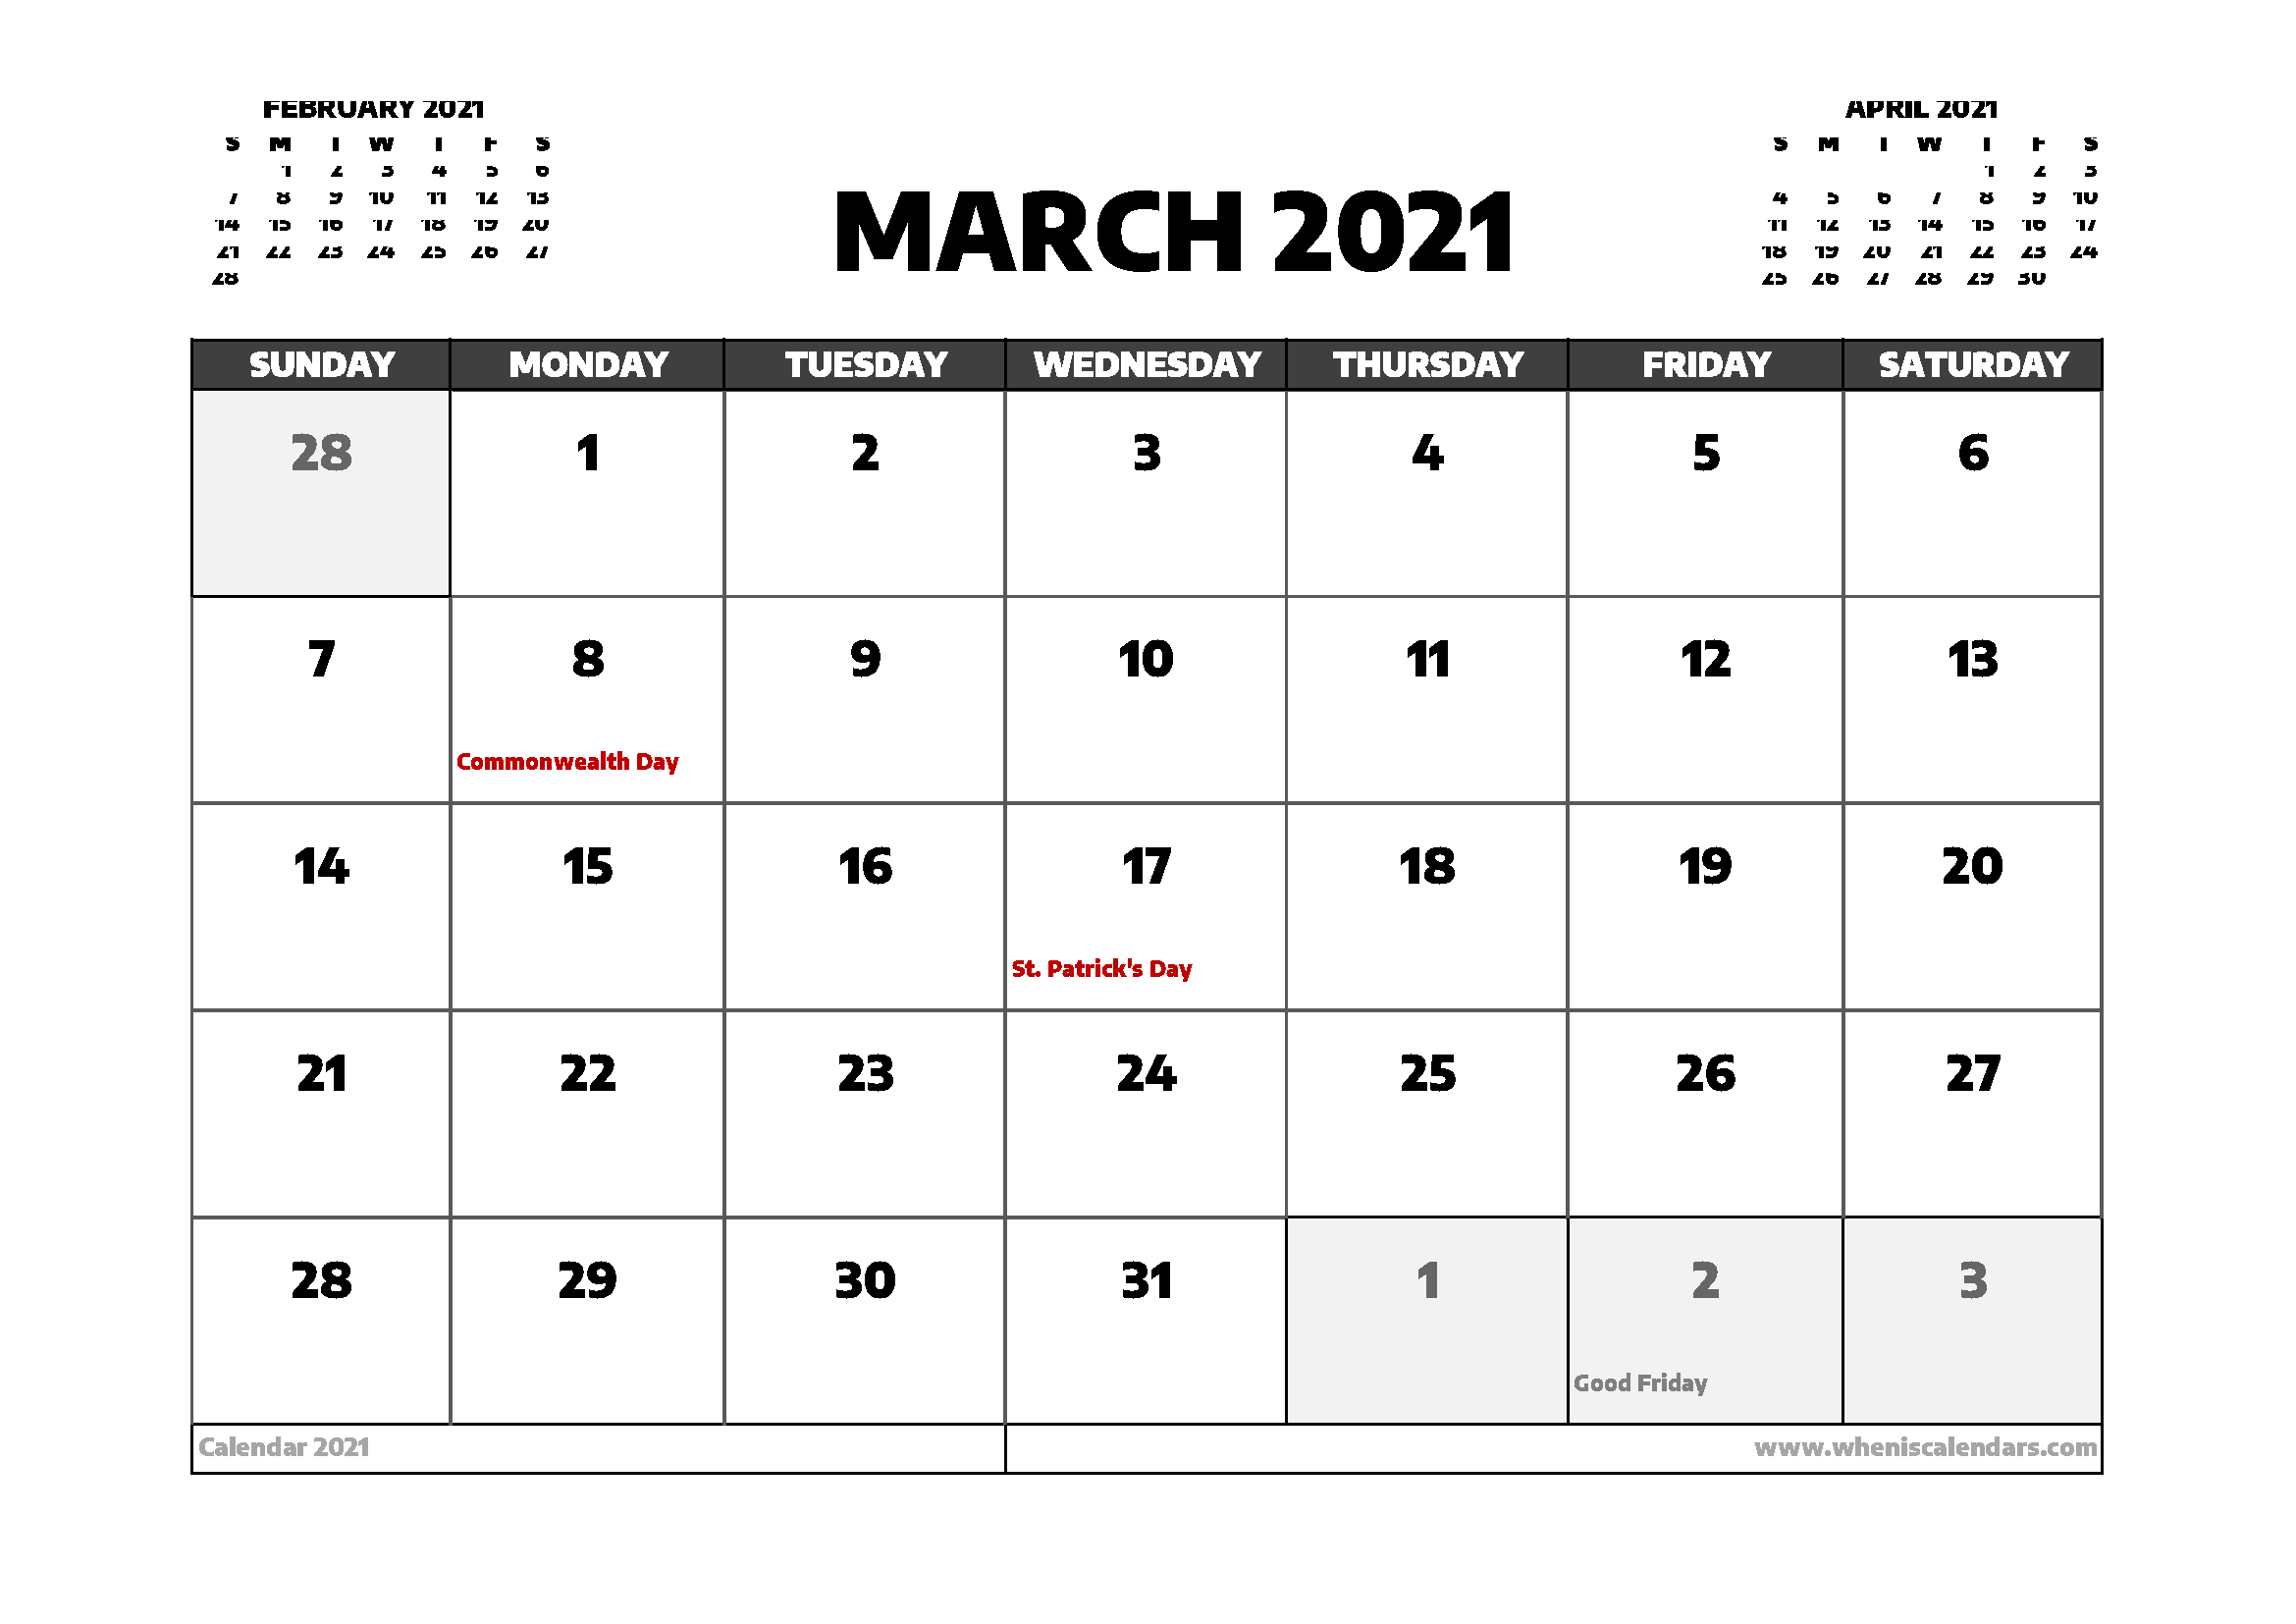 March 2021 Calendar Canada With Holidays-Canadian Calendar 2021 With Holidays Printable Landscape